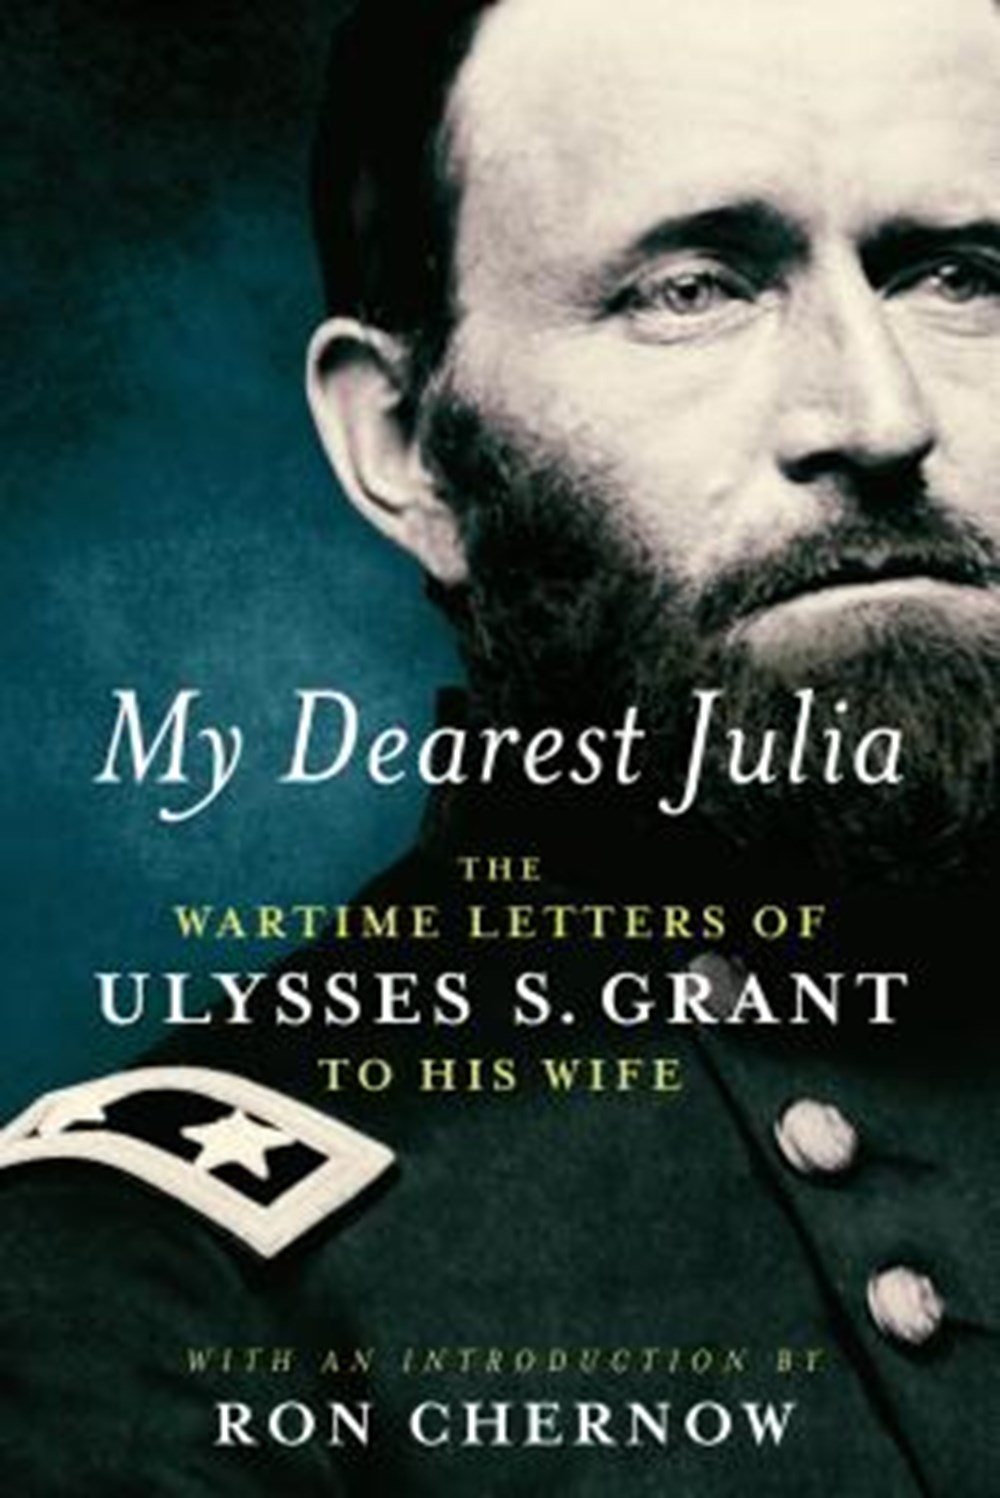 My Dearest Julia The Wartime Letters of Ulysses S. Grant to His Wife